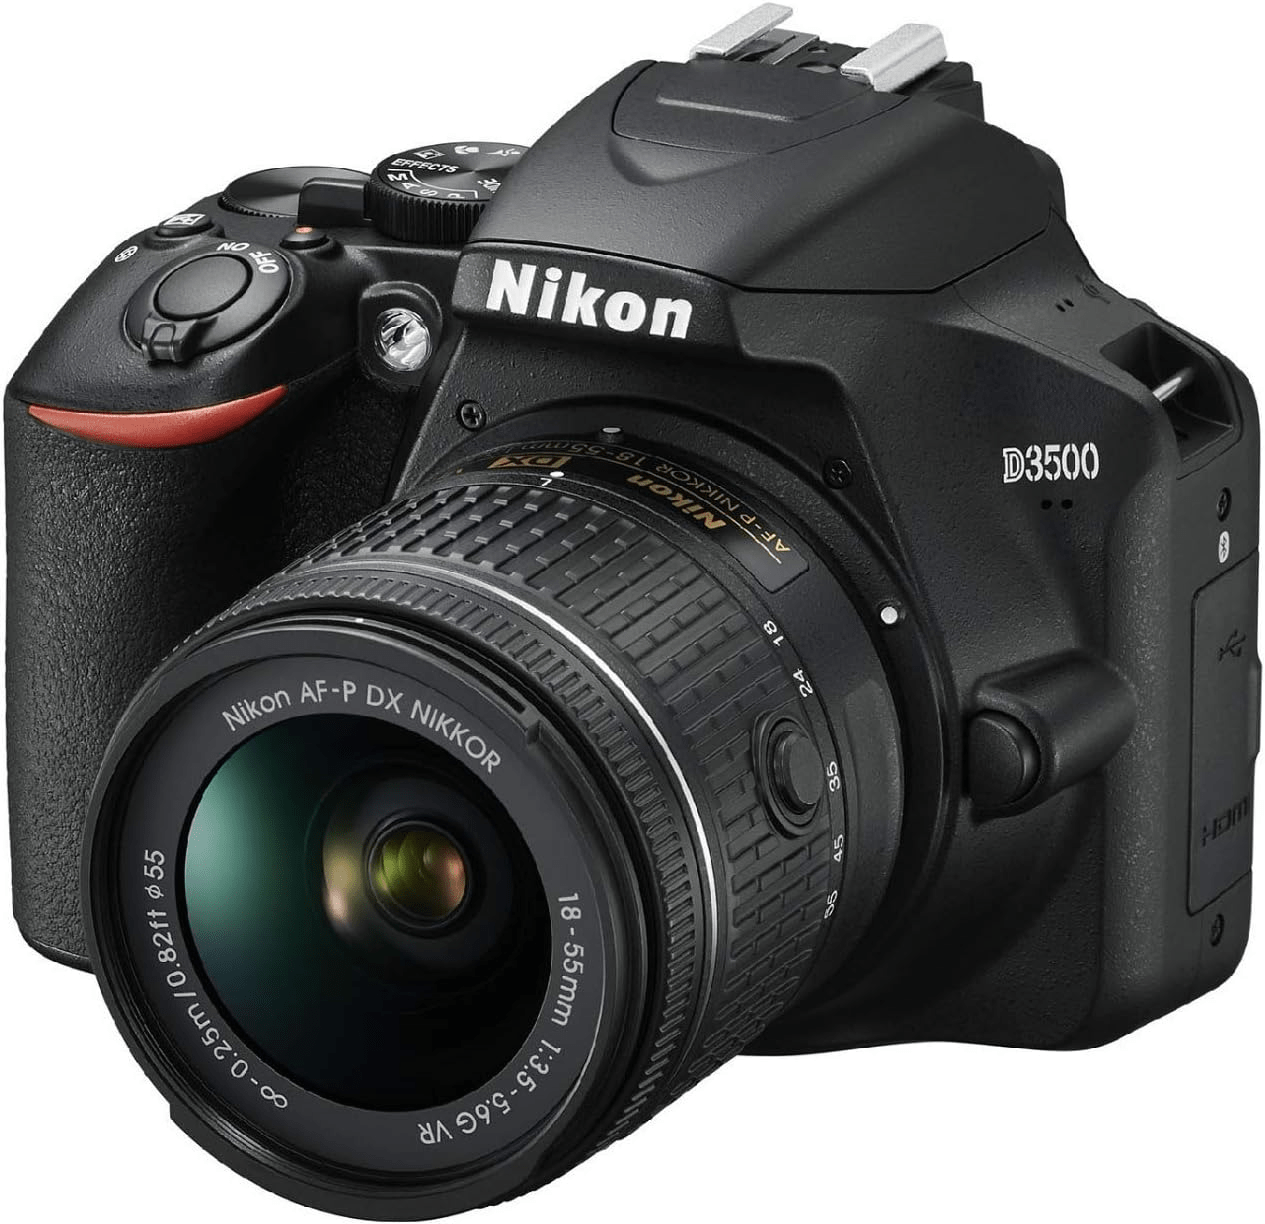 The Nikon D3500 - arguably the best camera for OnlyFans on a budget.